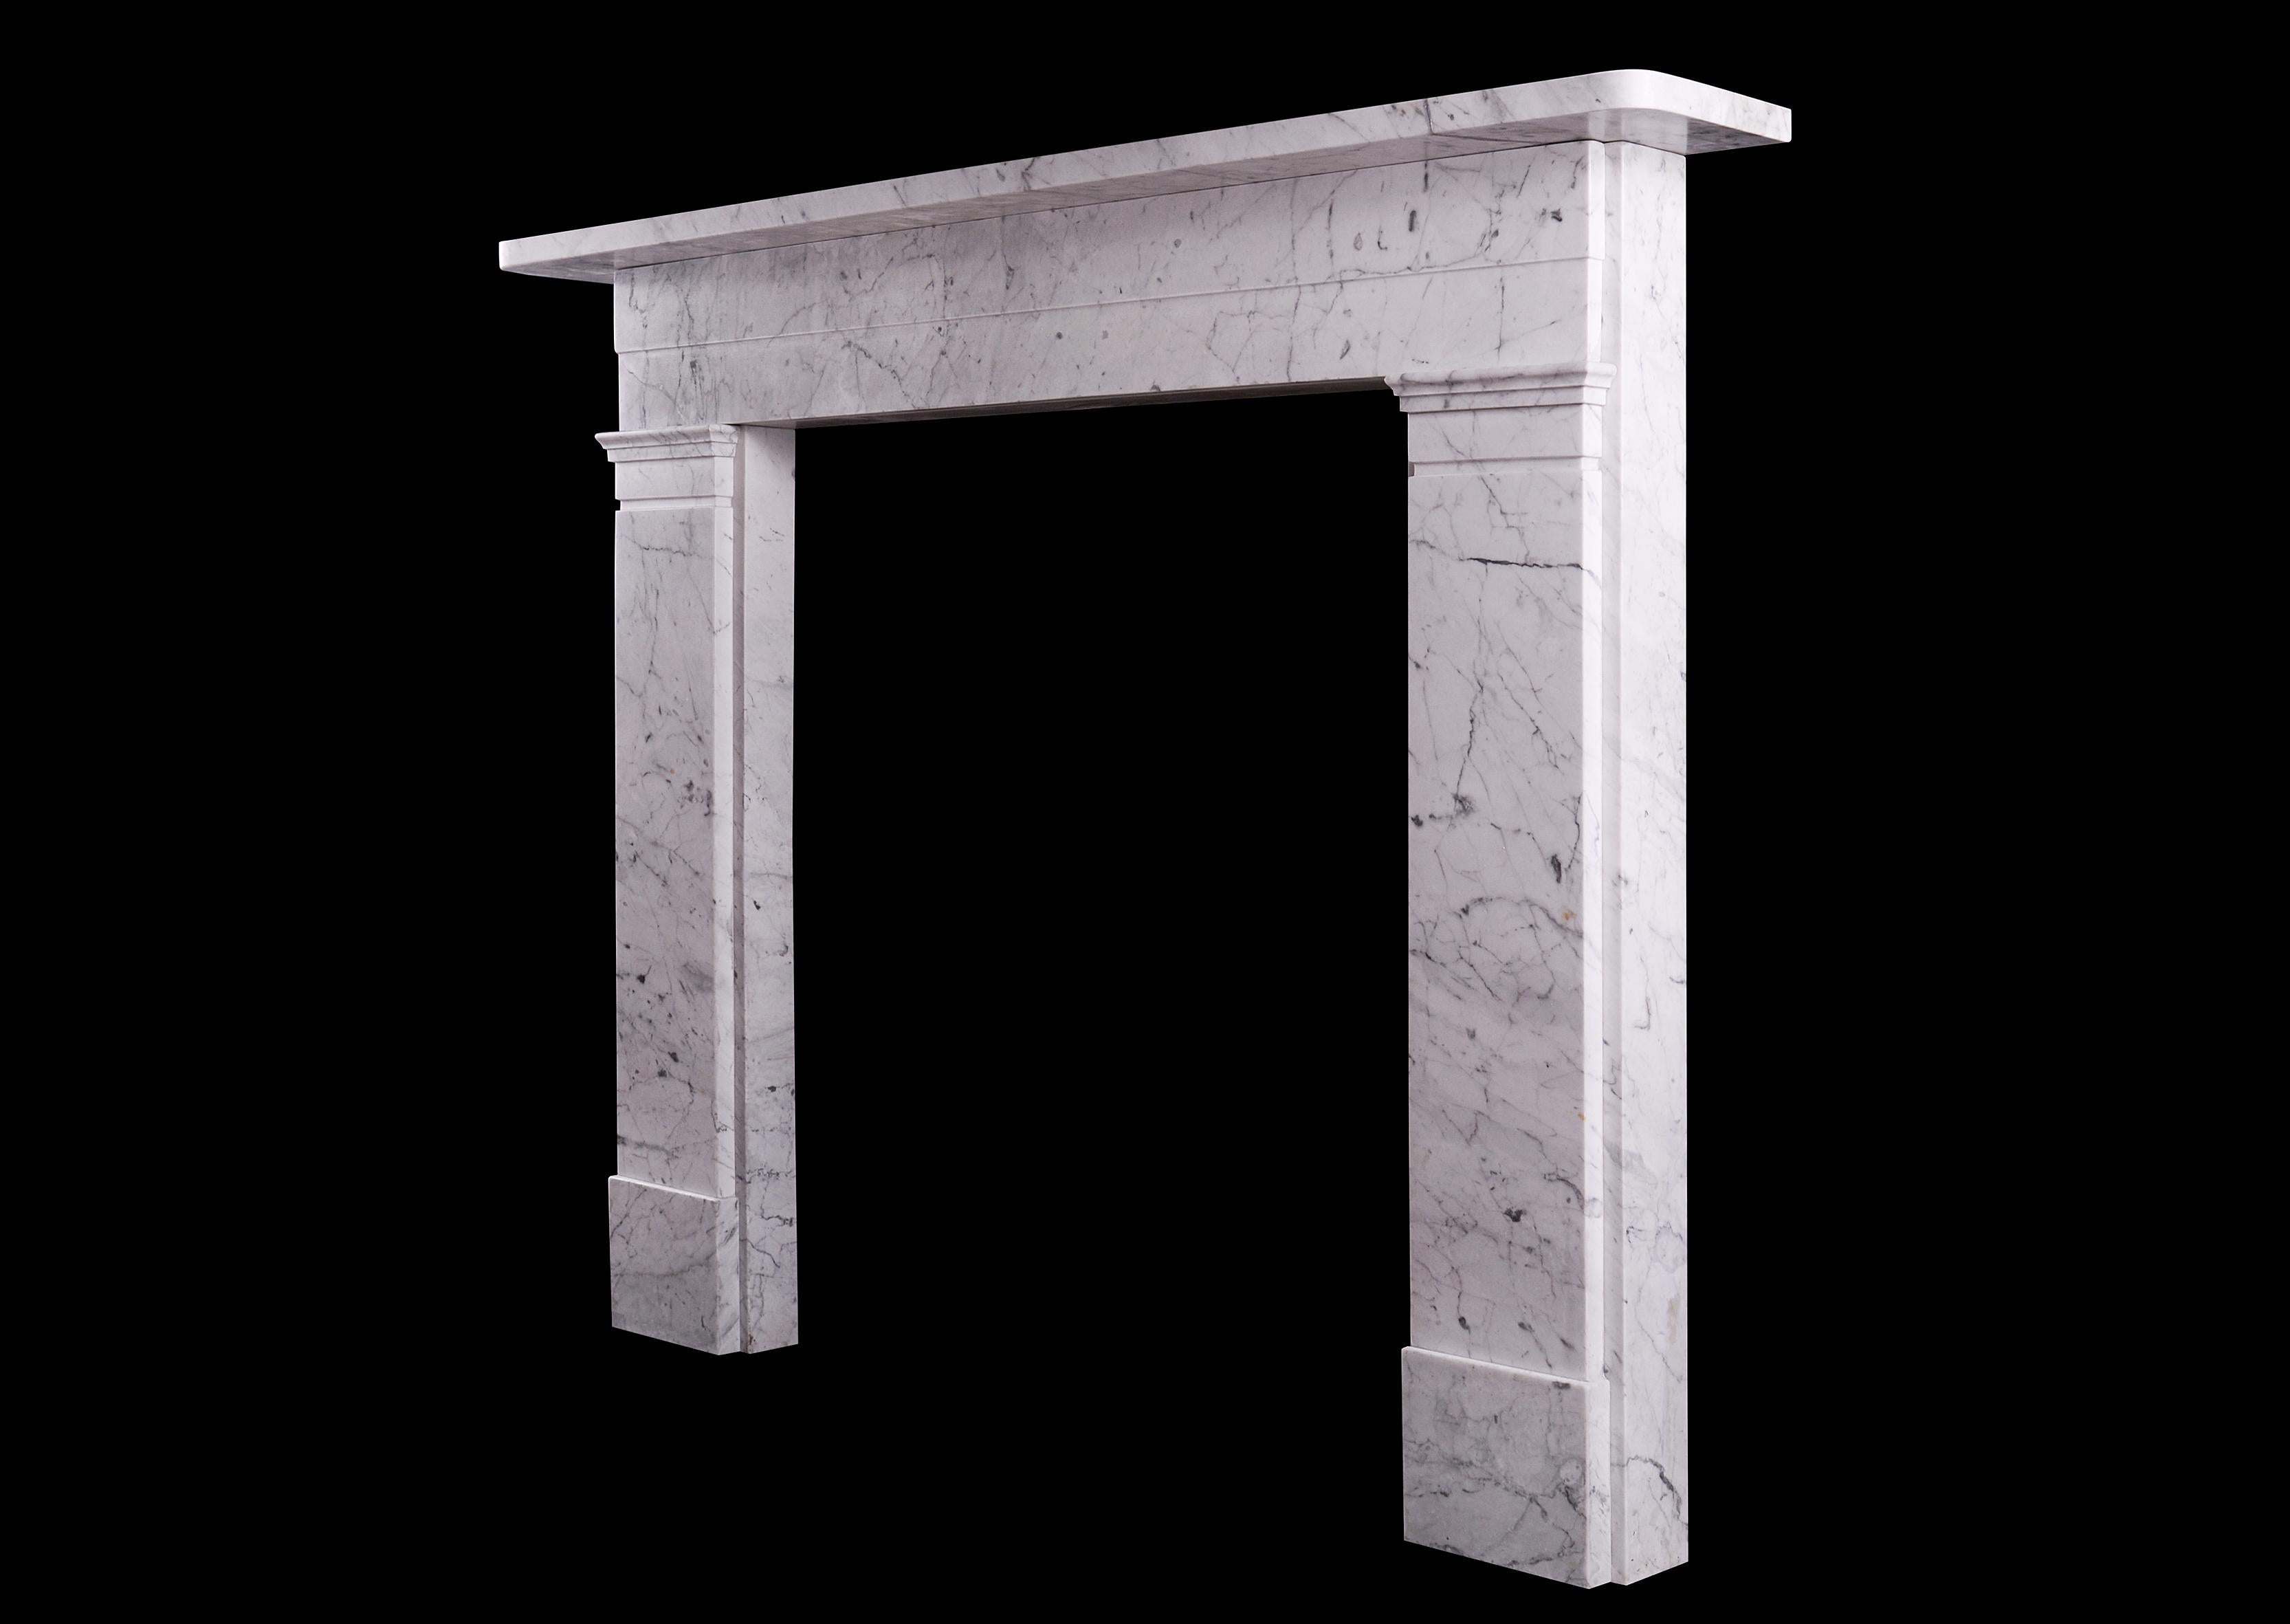 A period Victorian marble chimneypiece in Italian Carrara marble. The flat jambs surmounted by stepped frieze with plain shelf above. English, mid 19th century.

Measures: Shelf width: 1503 mm 59 